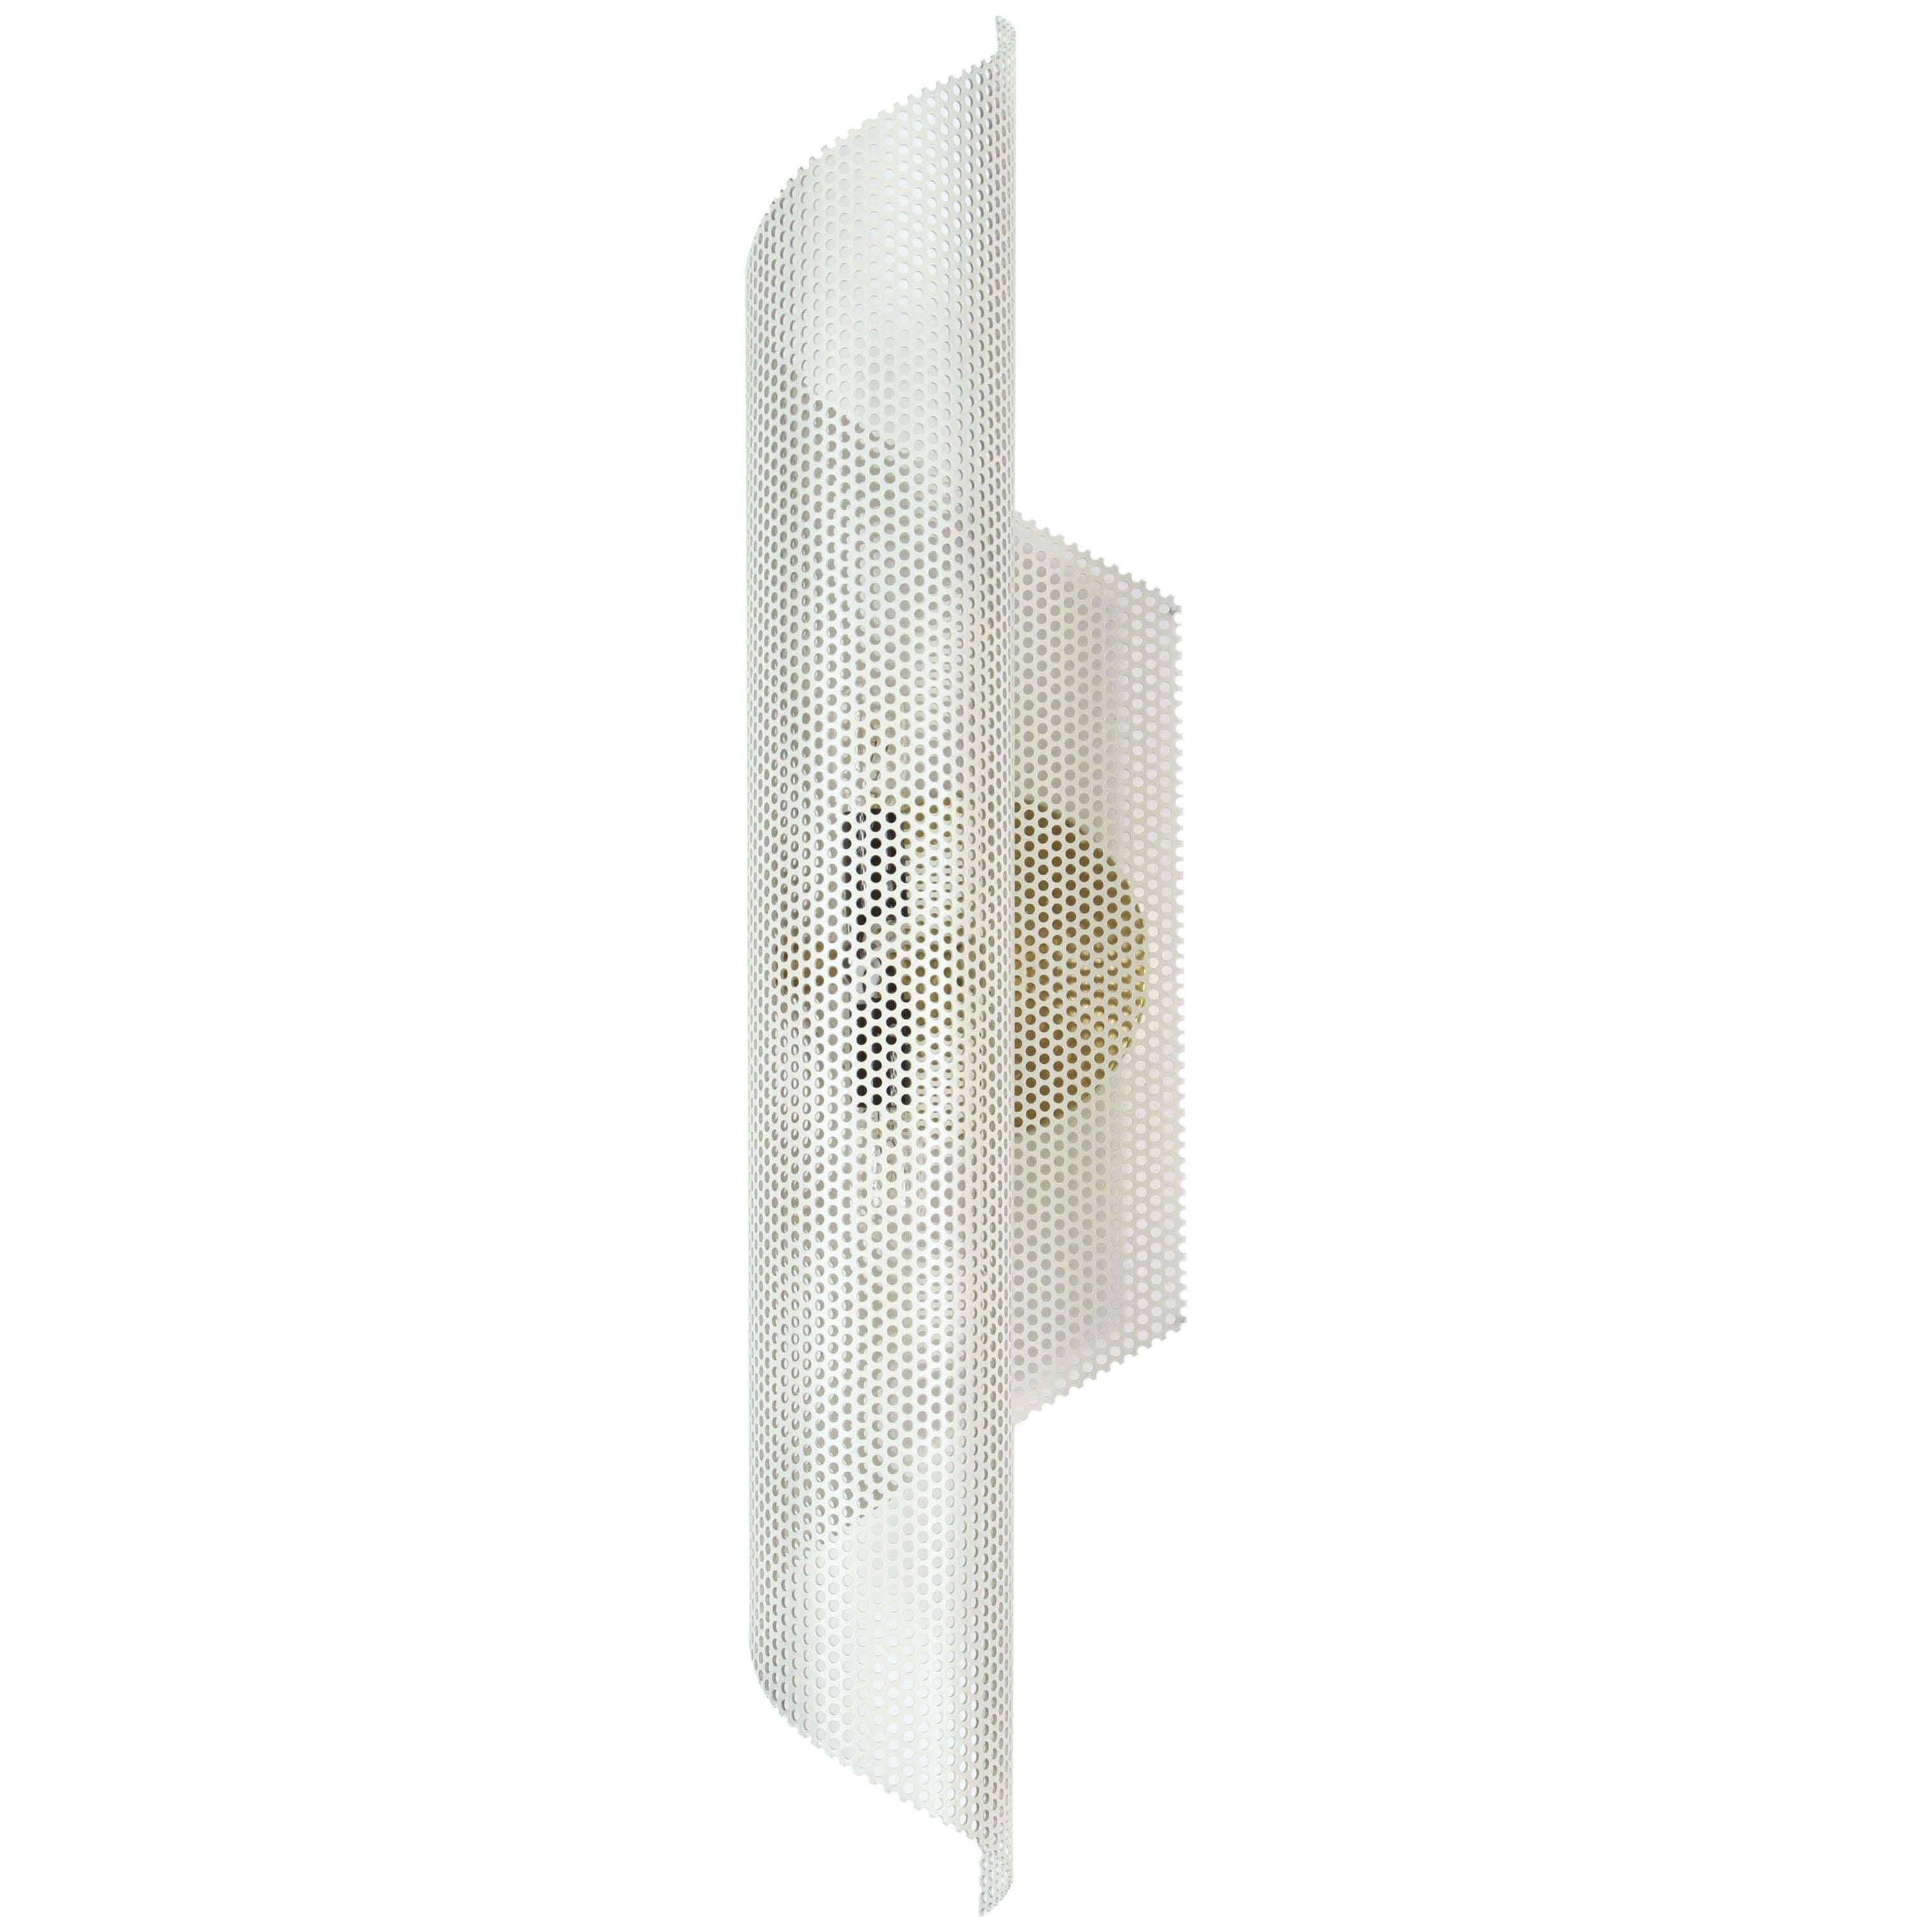 Rolled Perforated Sconce by Lawson-Fenning